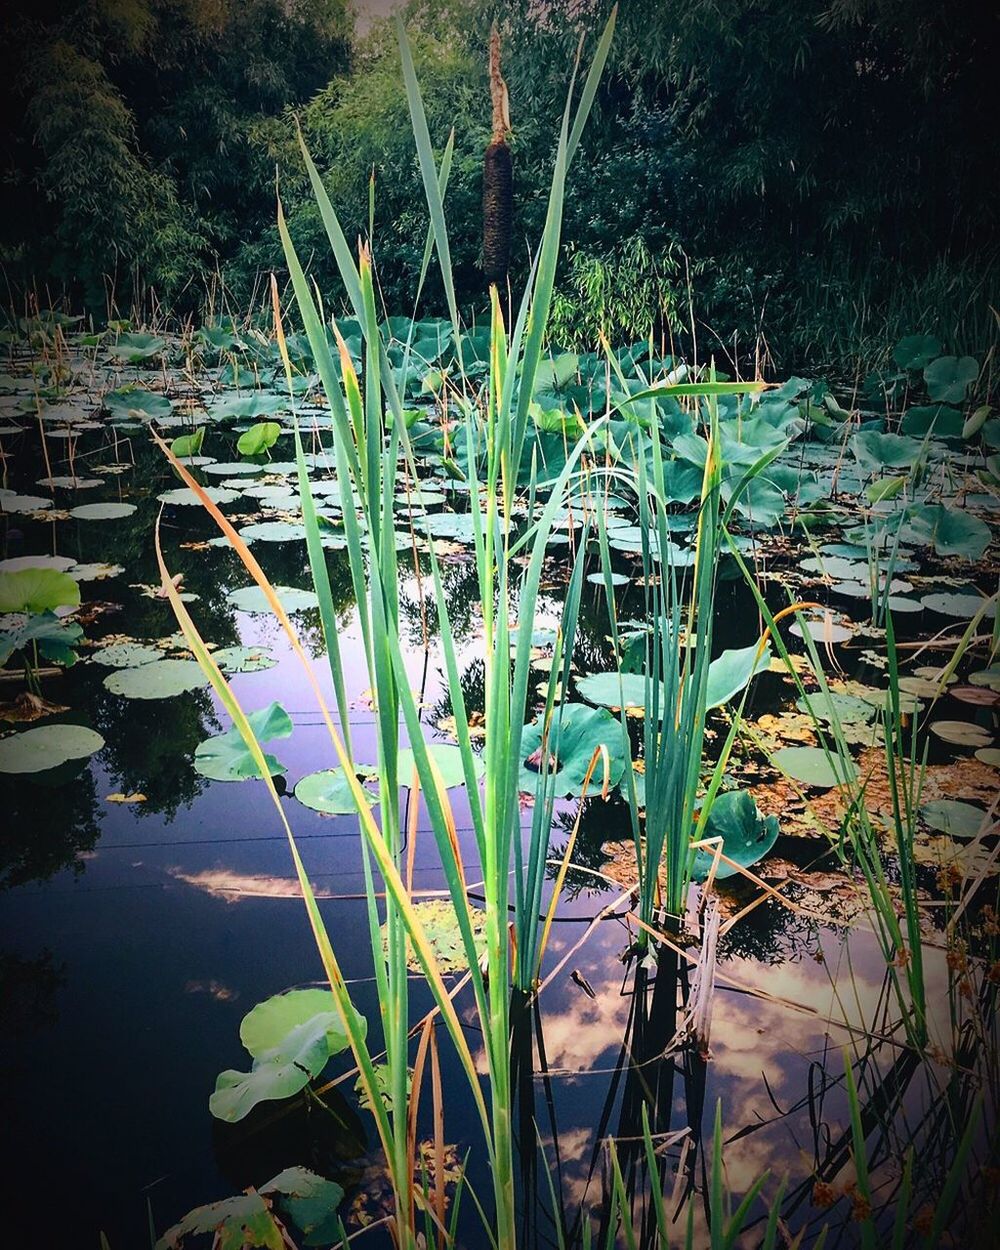 PLANTS GROWING BY LAKE